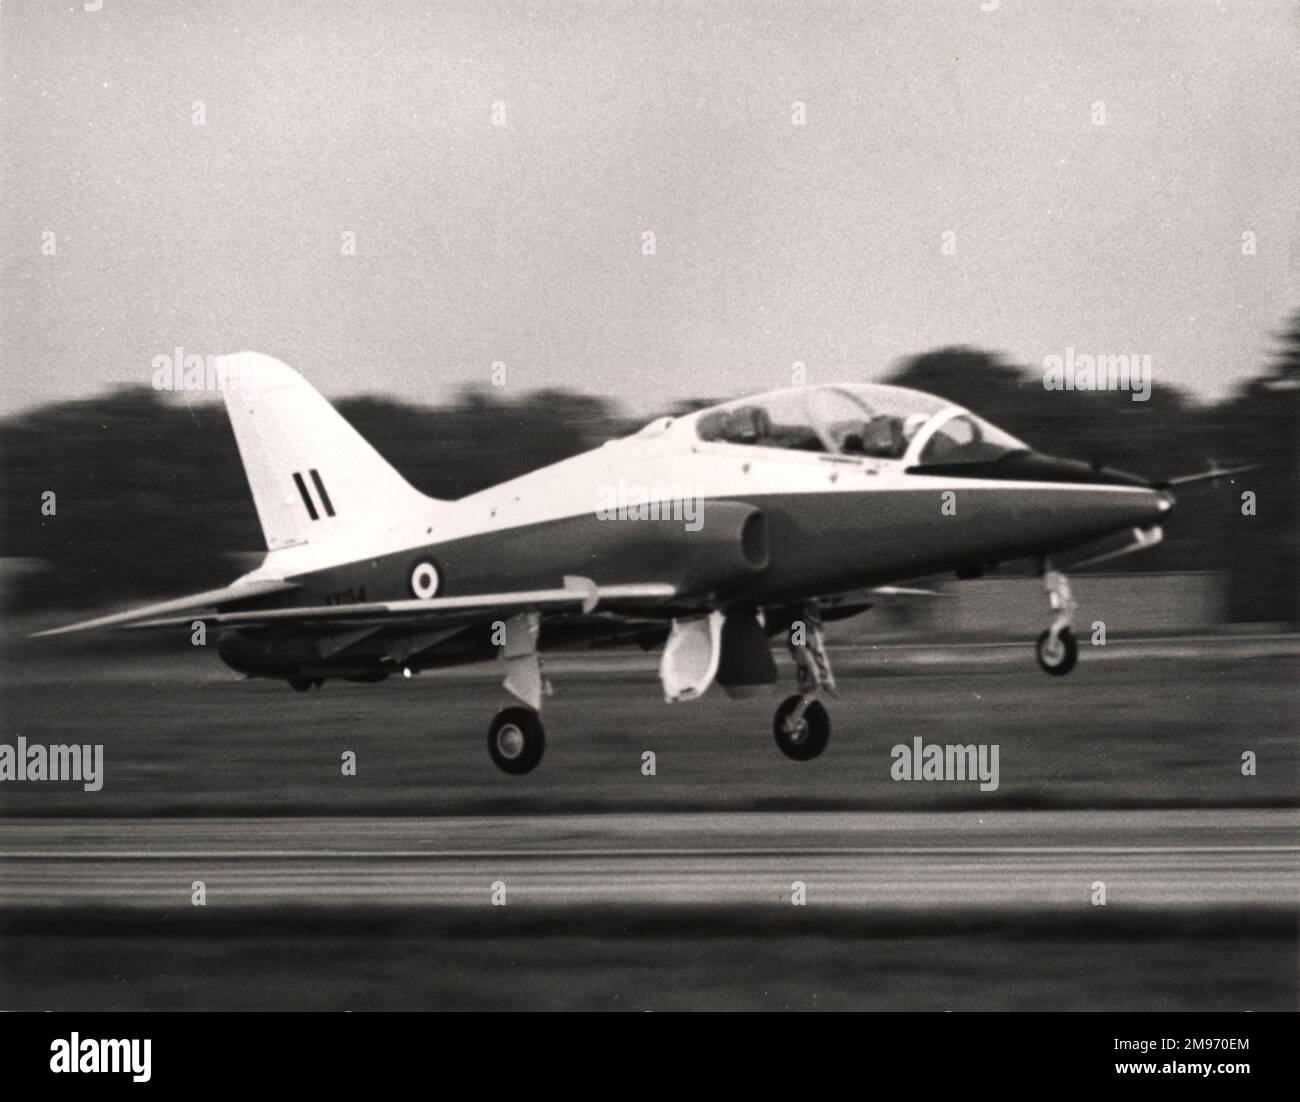 The first Hawk, XX154, takes to the air for the first time on 21 August 1974 with chief test pilot, Duncan Simpson, at the controls. The flight from the flight test centre at Dunsfold lasted 53 minutes. Stock Photo